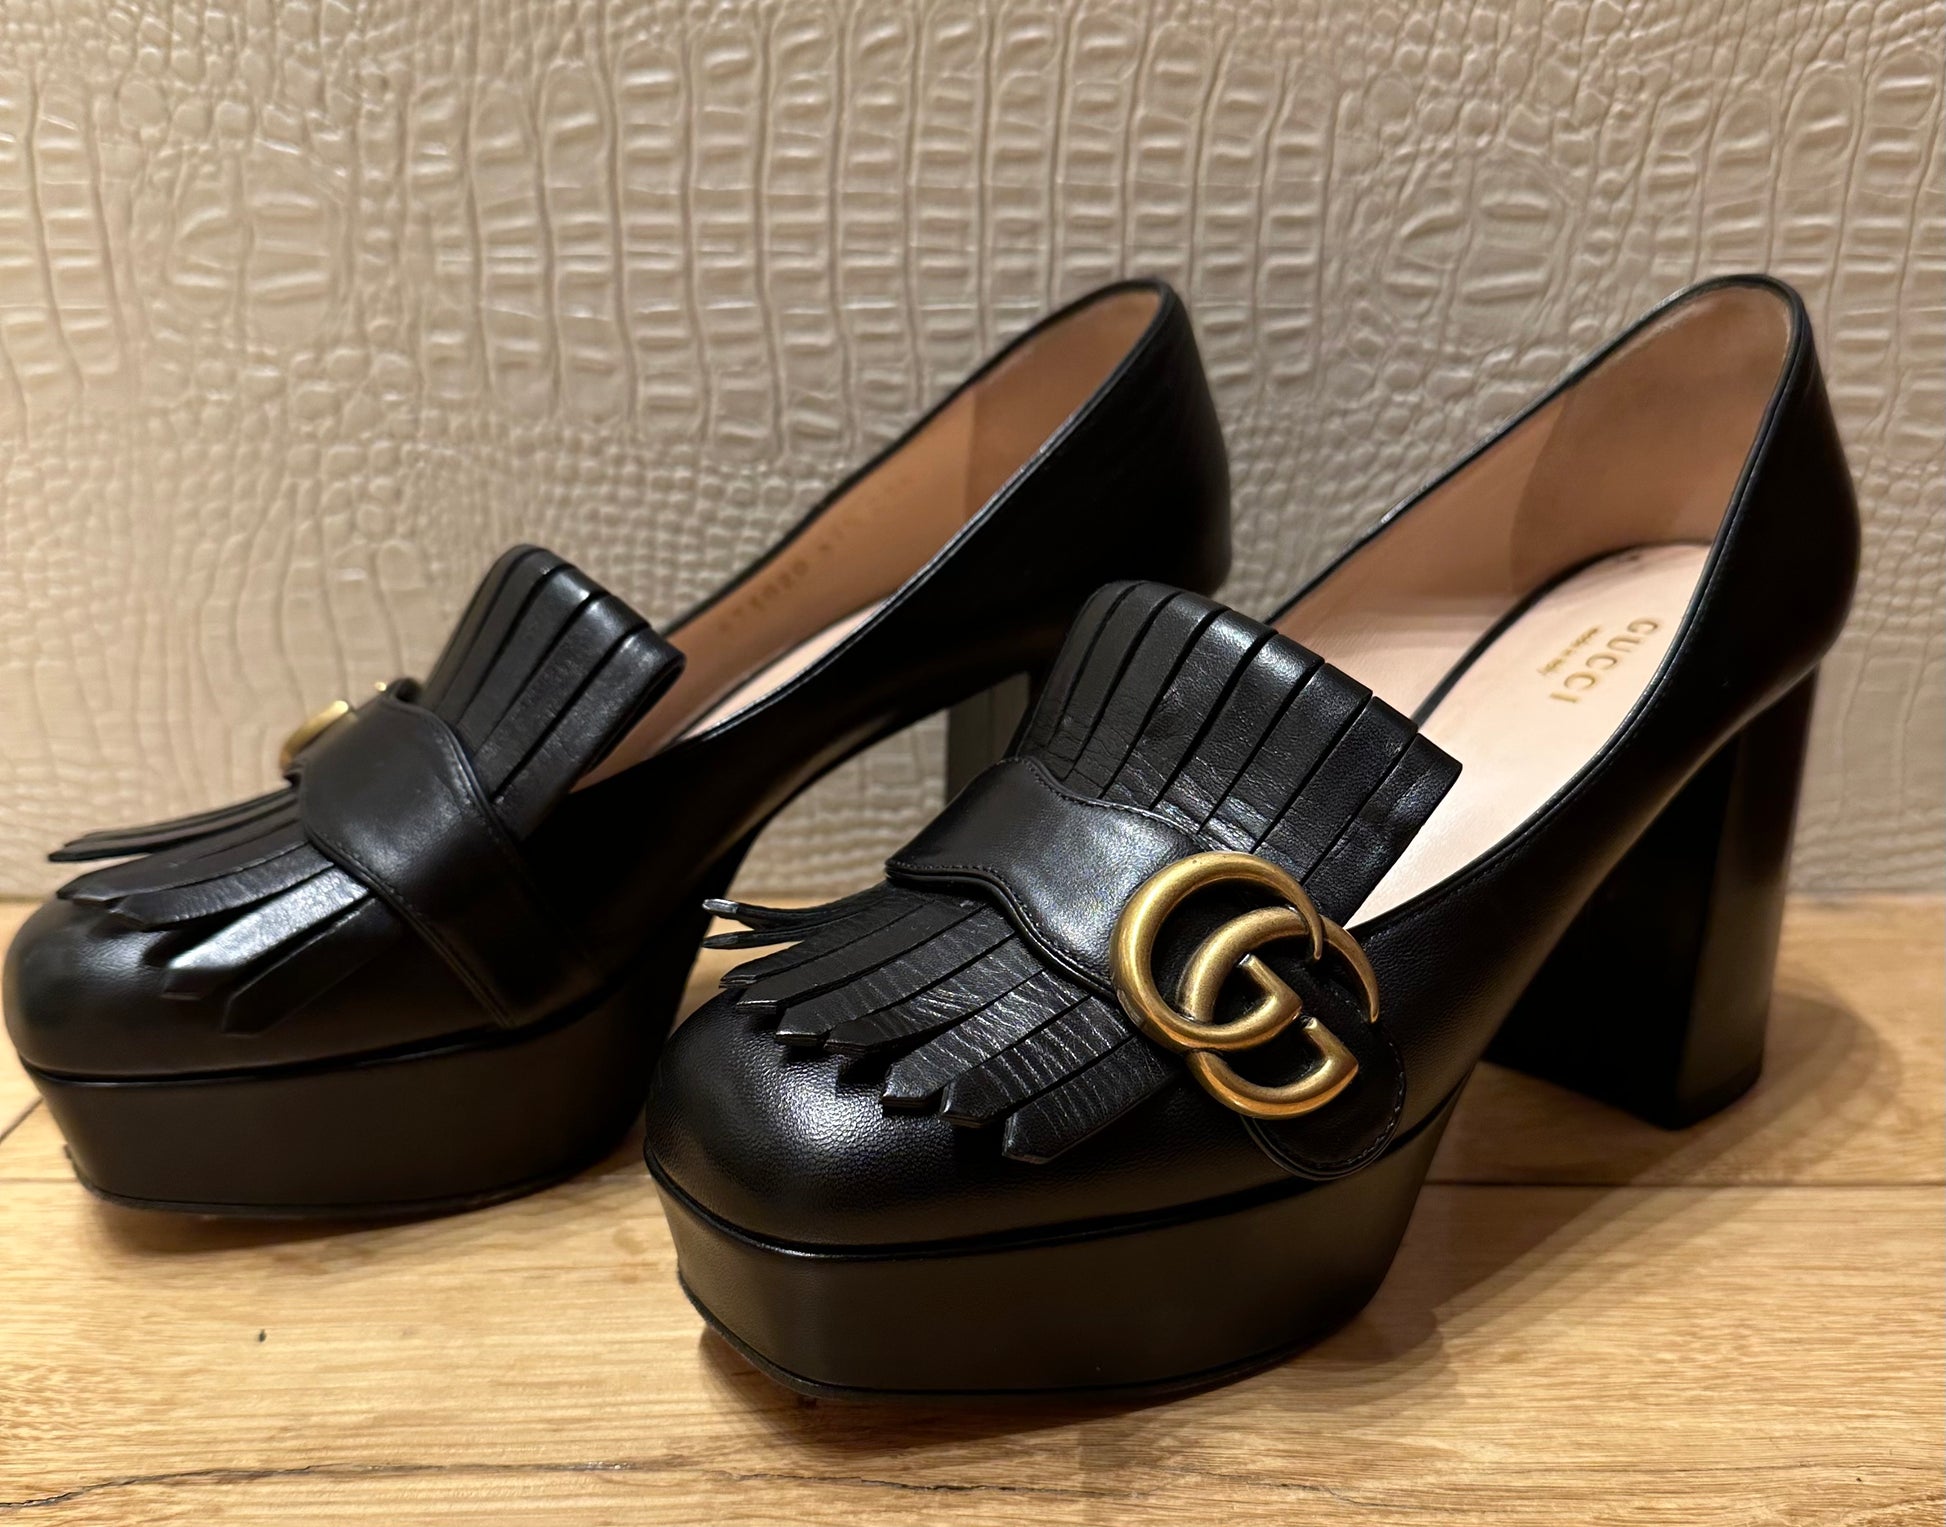 GUCCI Black Leather GG Marmont Fringe Platform Loafer Pumps | Size IT 37.5 | Very Good Condition | Made in Italy